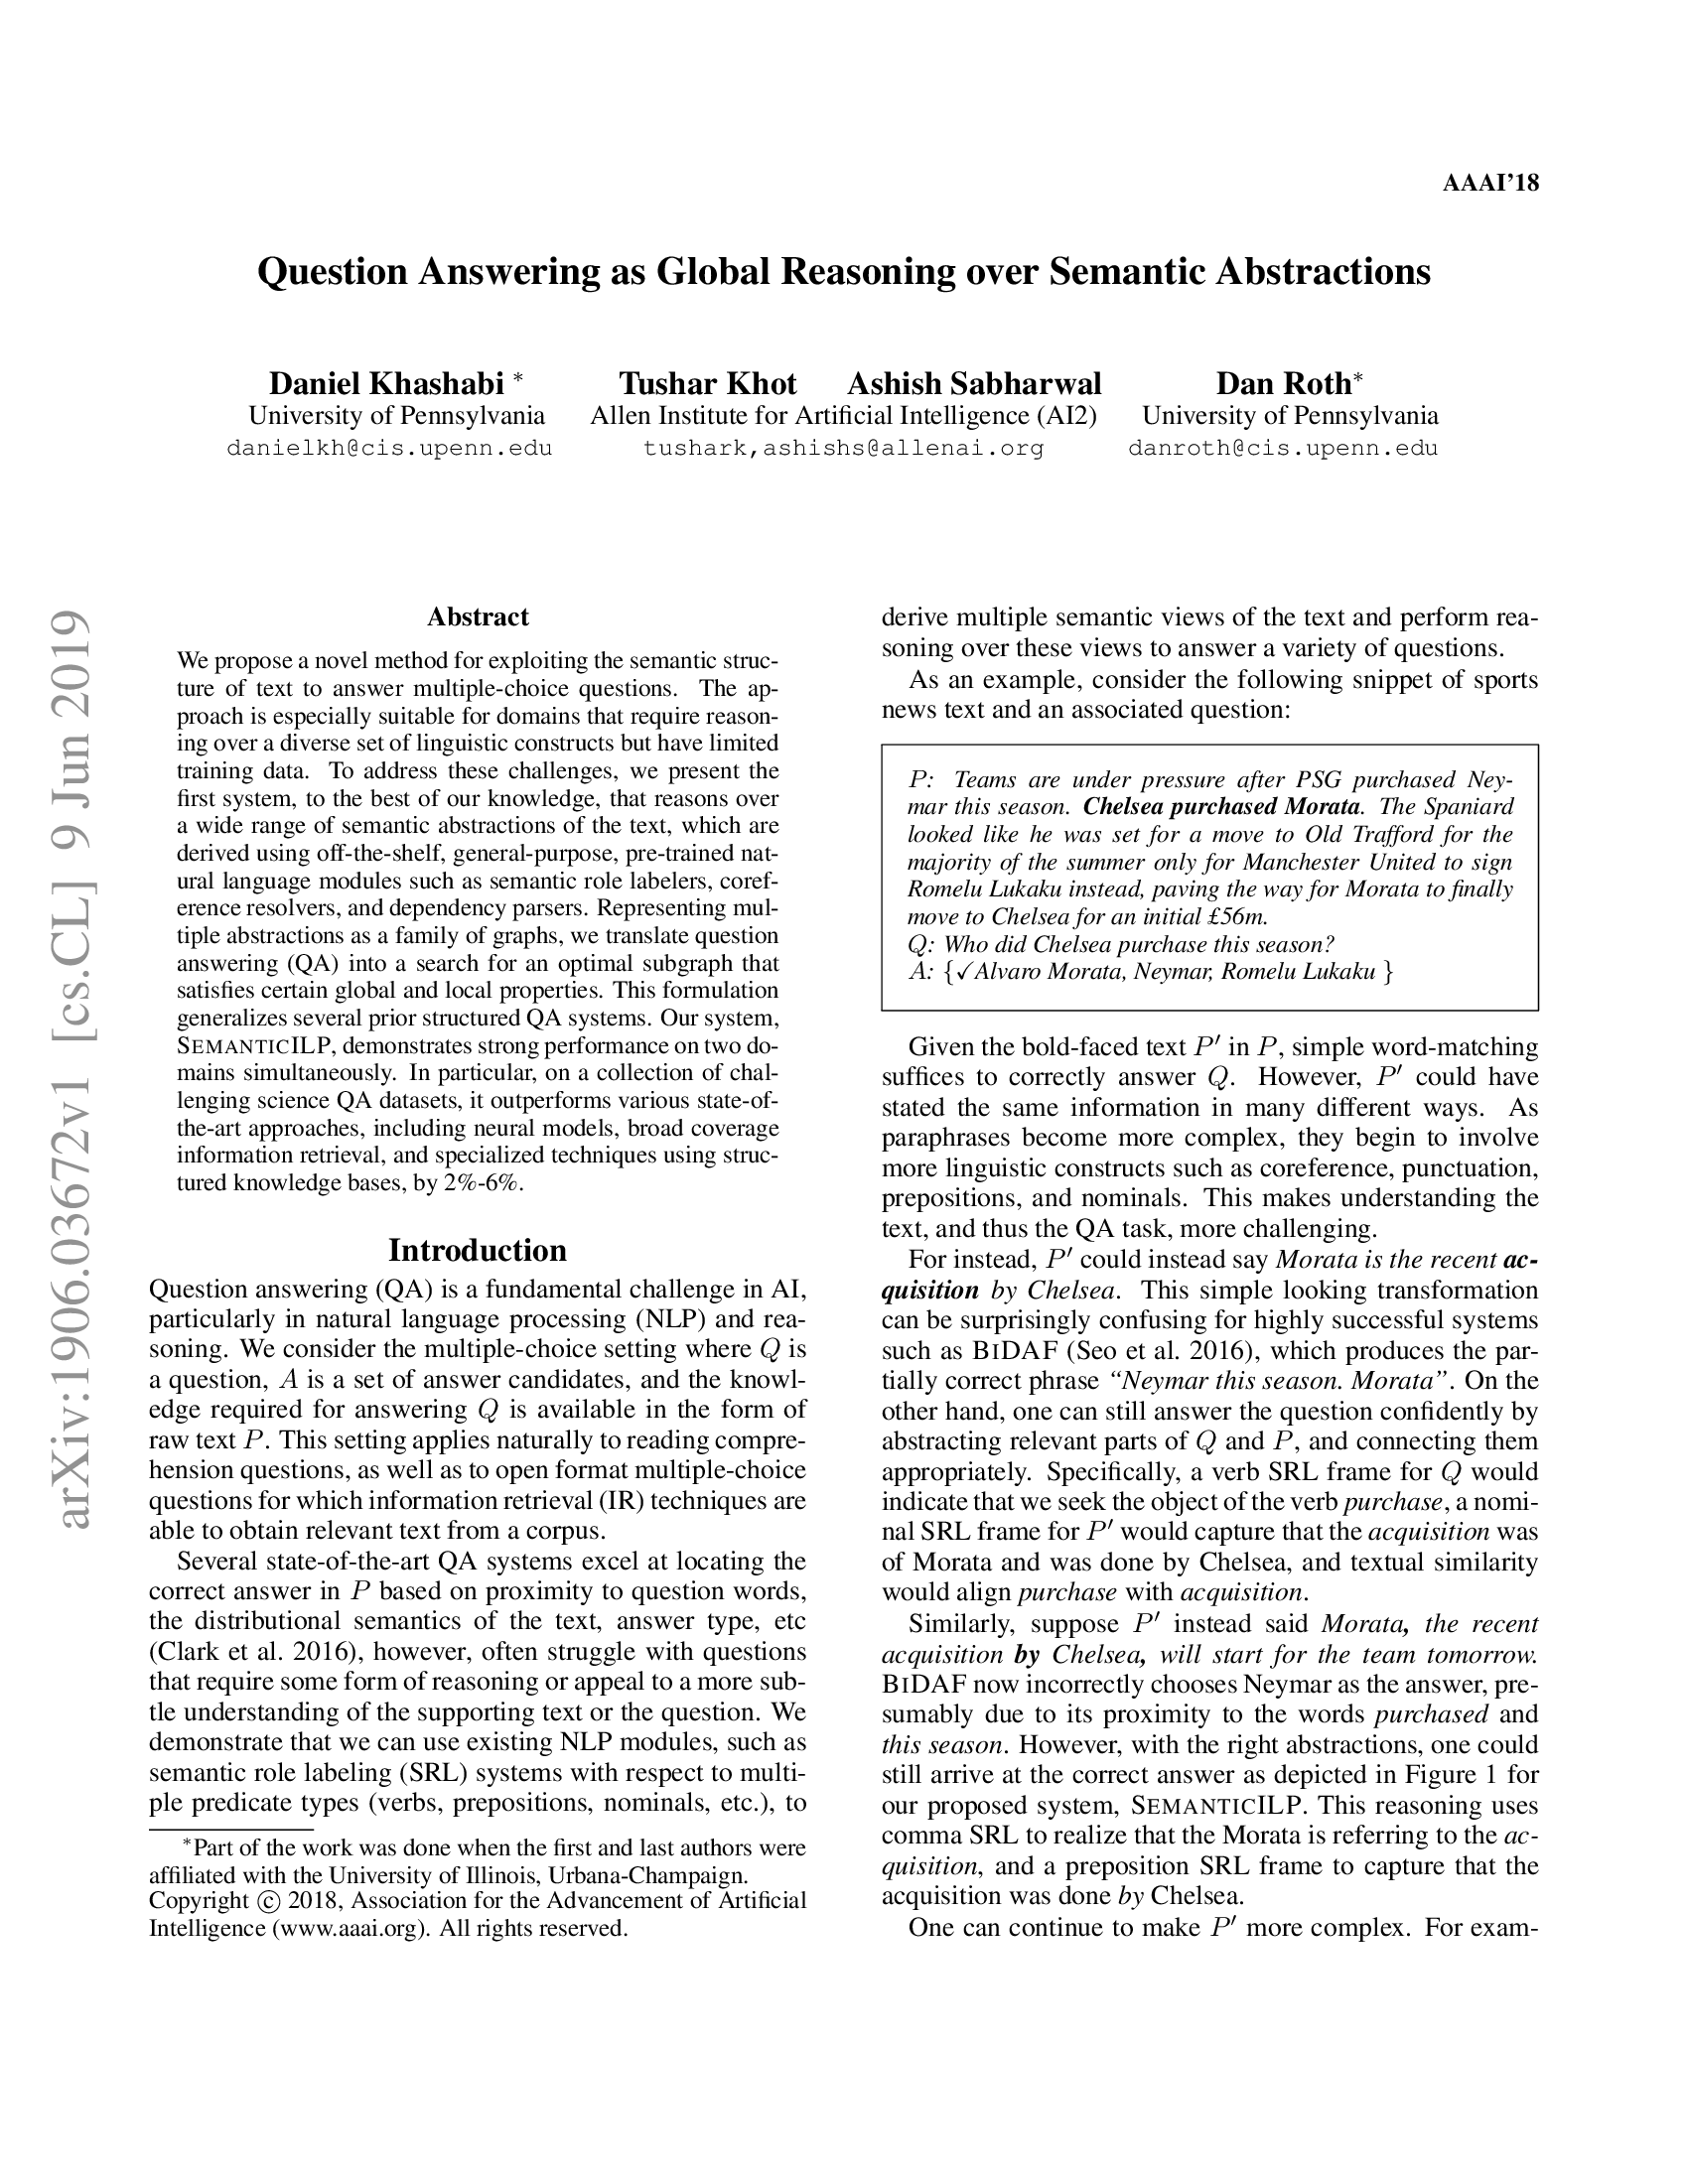 Question Answering as Global Reasoning Over Semantic Abstractions